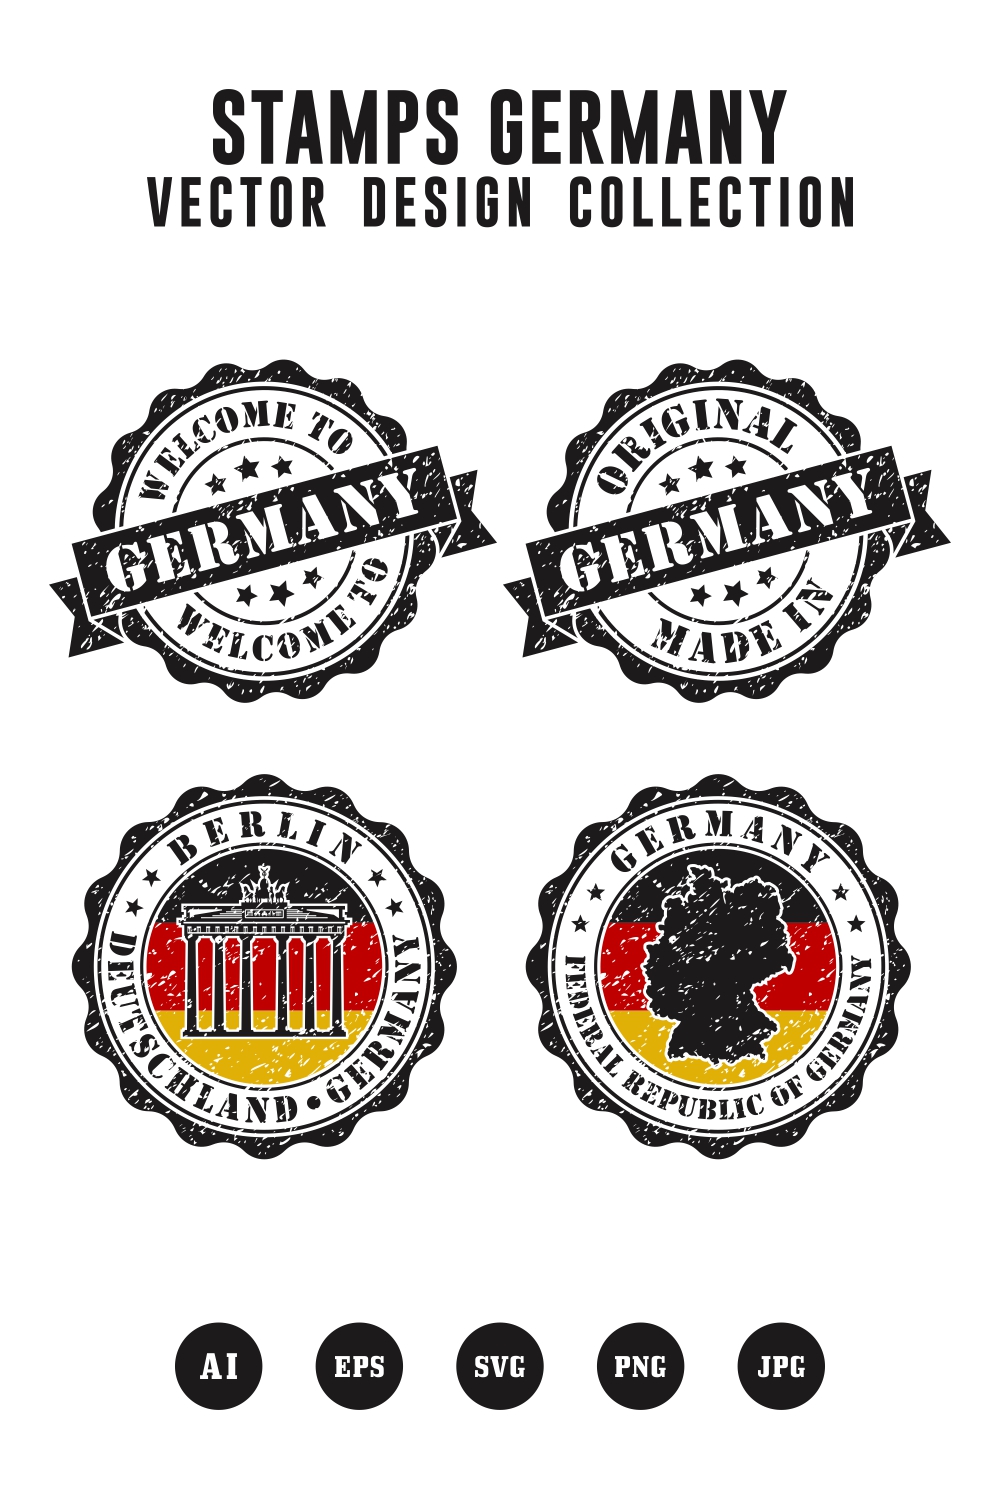 welcome to germany stamps vector logo design collection - $4 pinterest preview image.